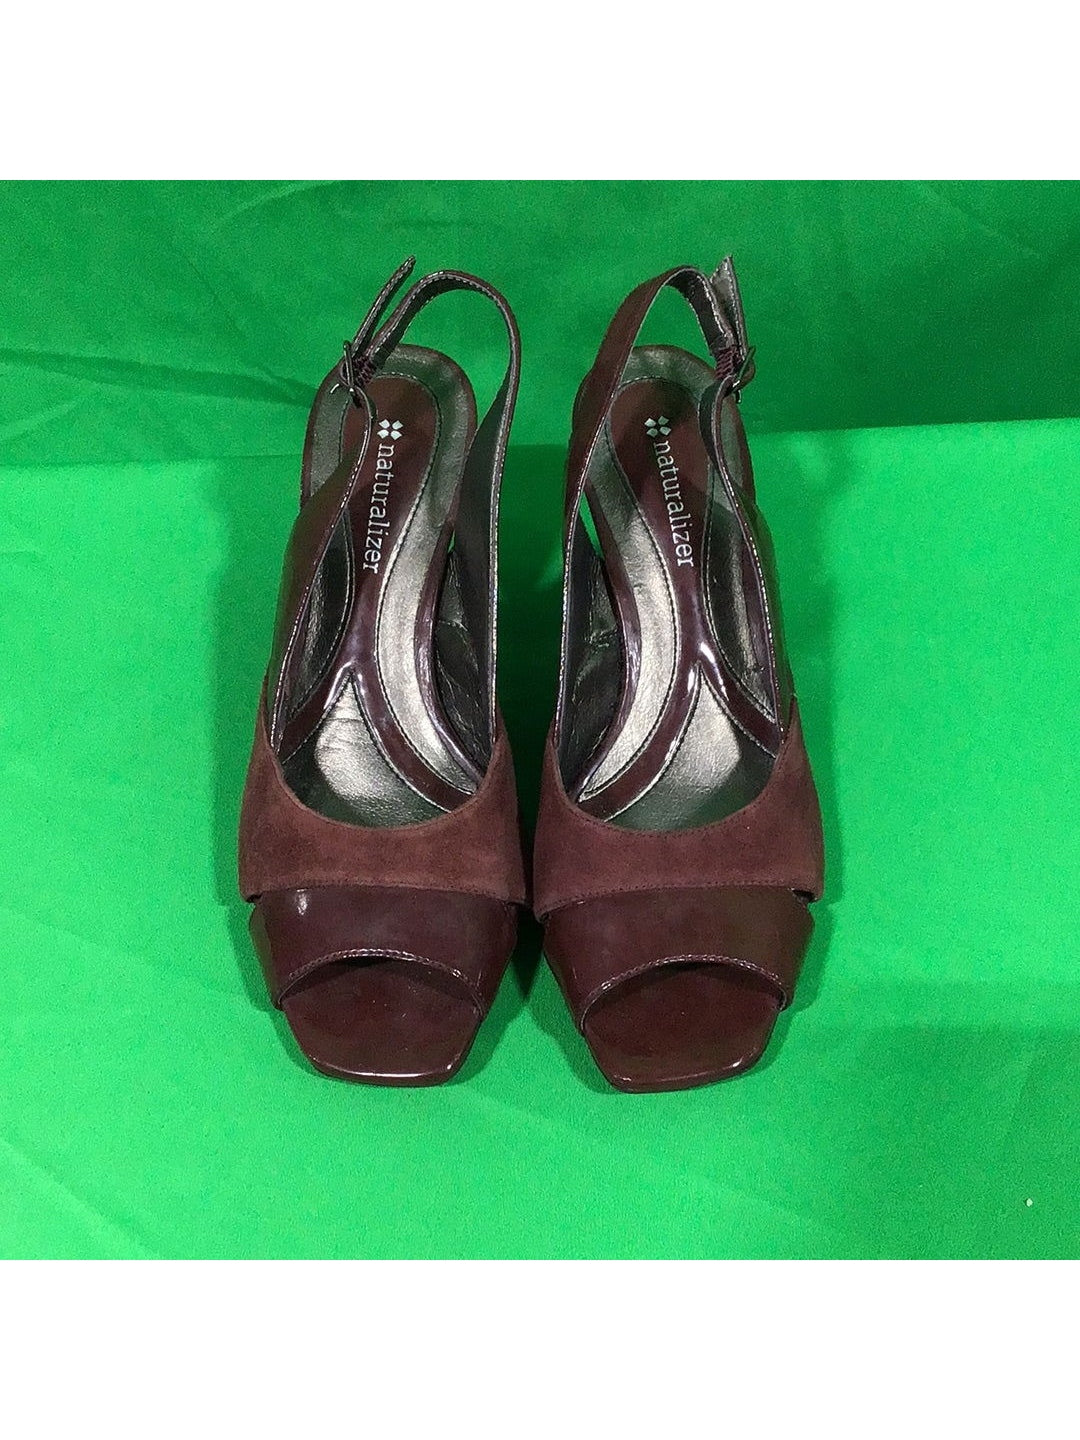 Naturalizer Women 6 1/2 Red High Heels - In Box - The Kennedy Collective Thrift - 